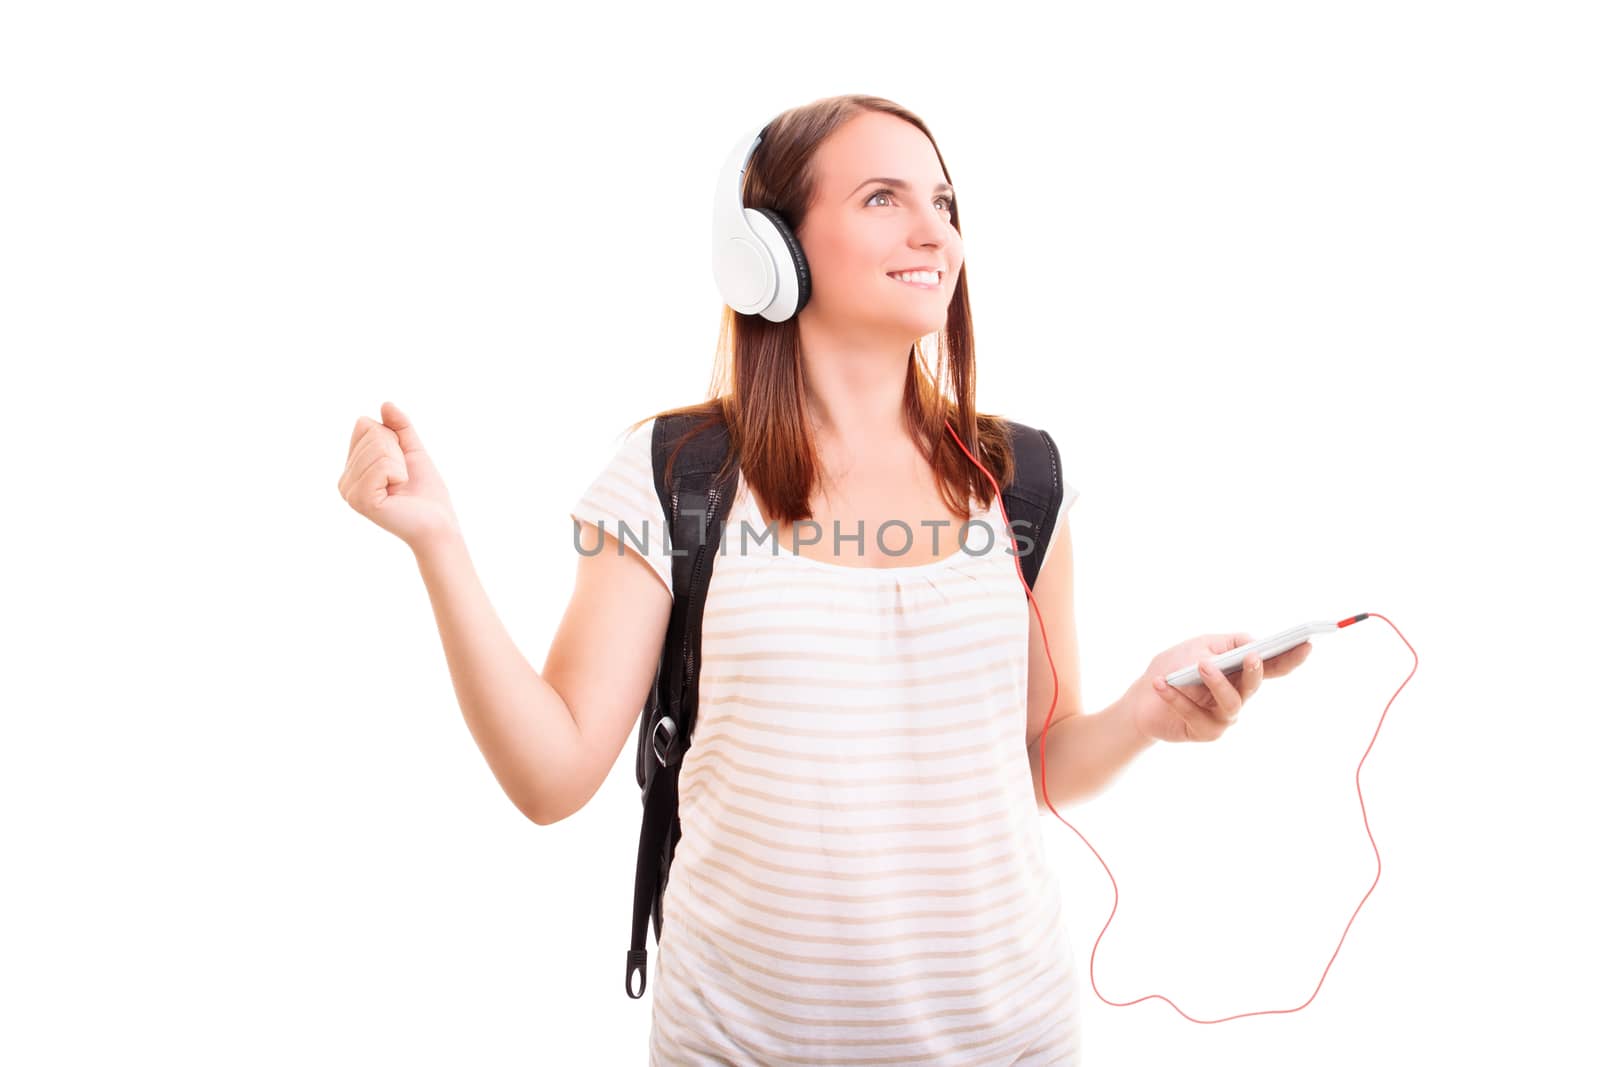 Beautiful smiling blond young girl with headphones listening to music, isolated on white background. Music and sound concept.